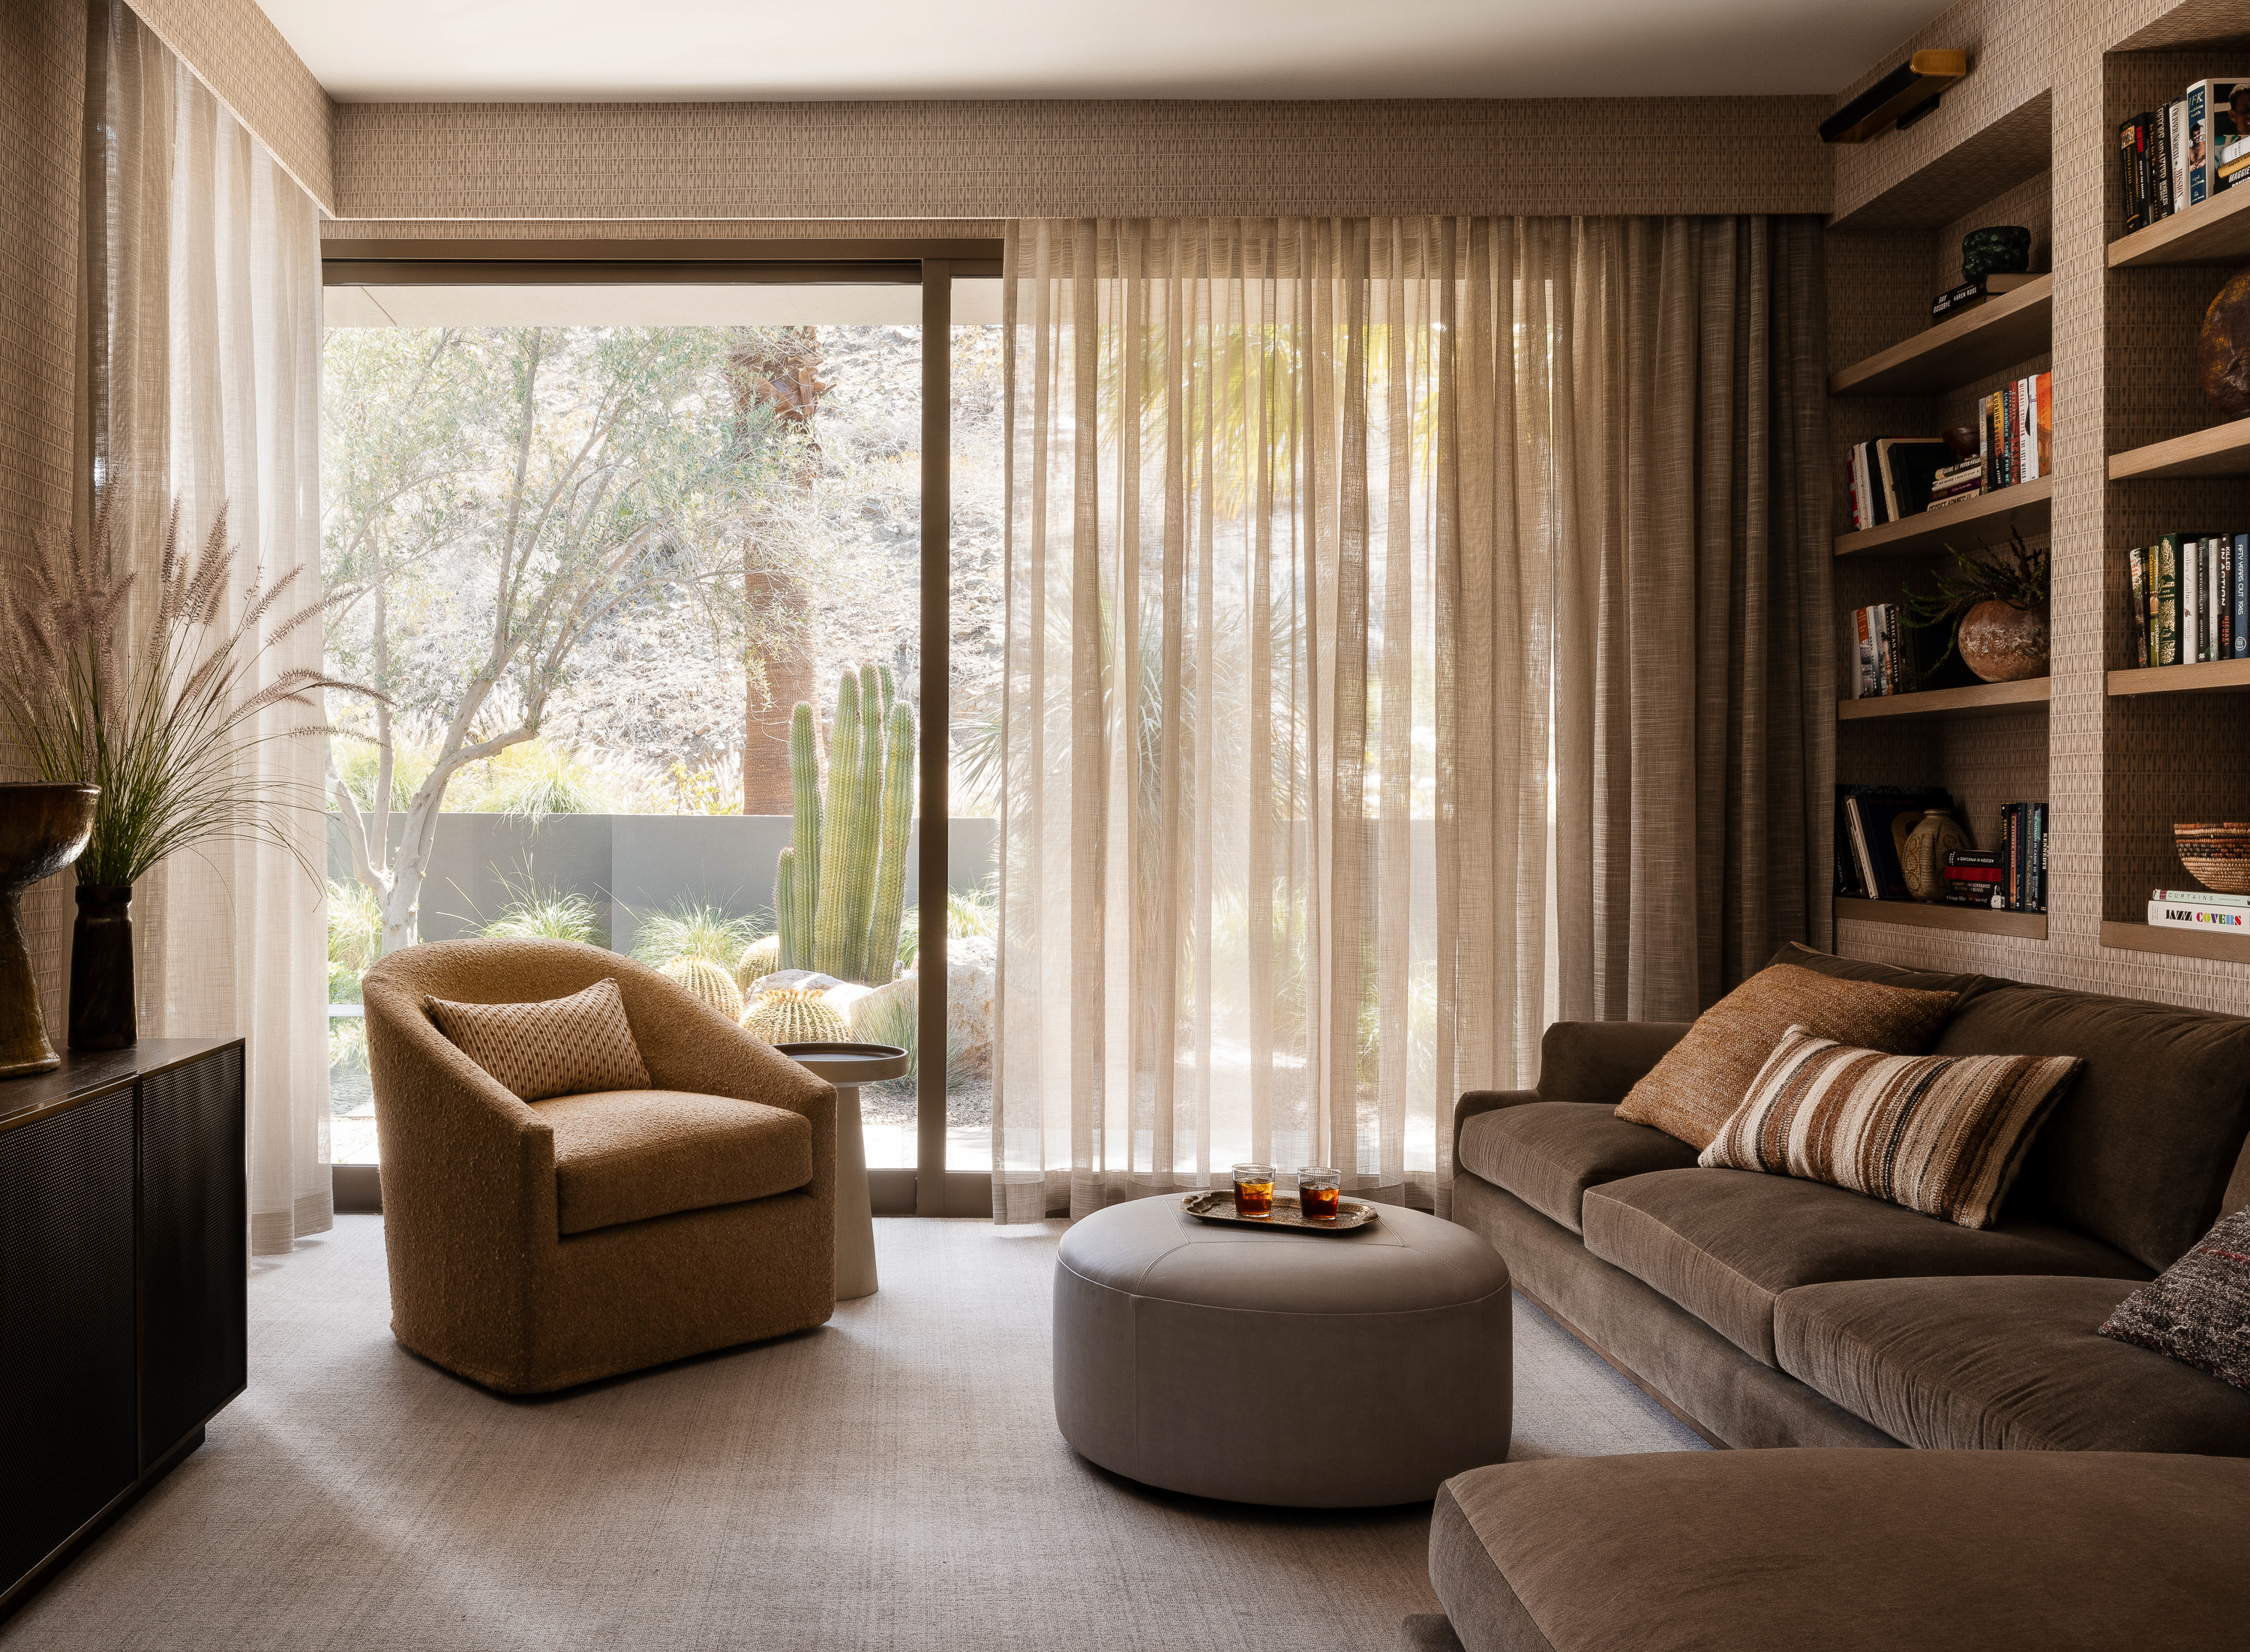 Office/family room at Palm Springs Retreat: Veiled rock formations backdrop a textured wall, embracing warmth and comfort in a cozy, intimate space.